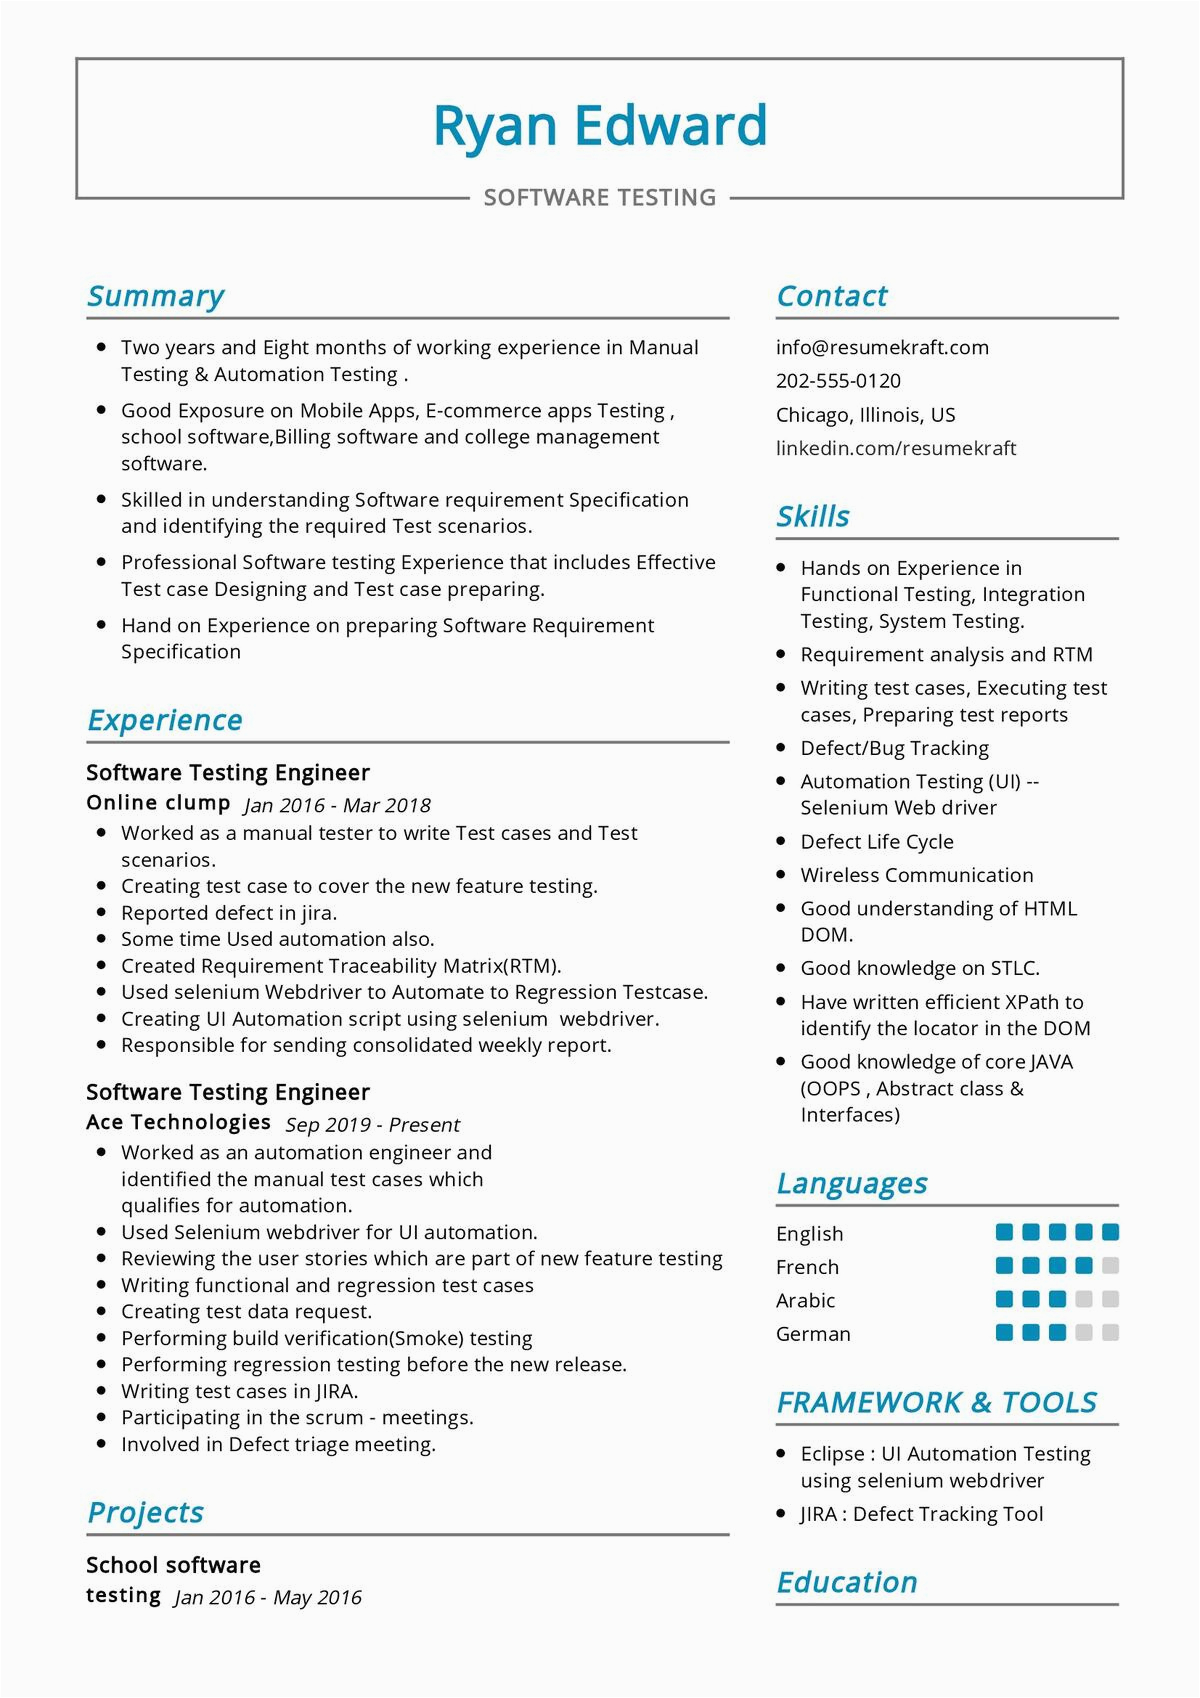 Sample Resume for software Tester 2 Years Experience software Testing Resume Sample 2021